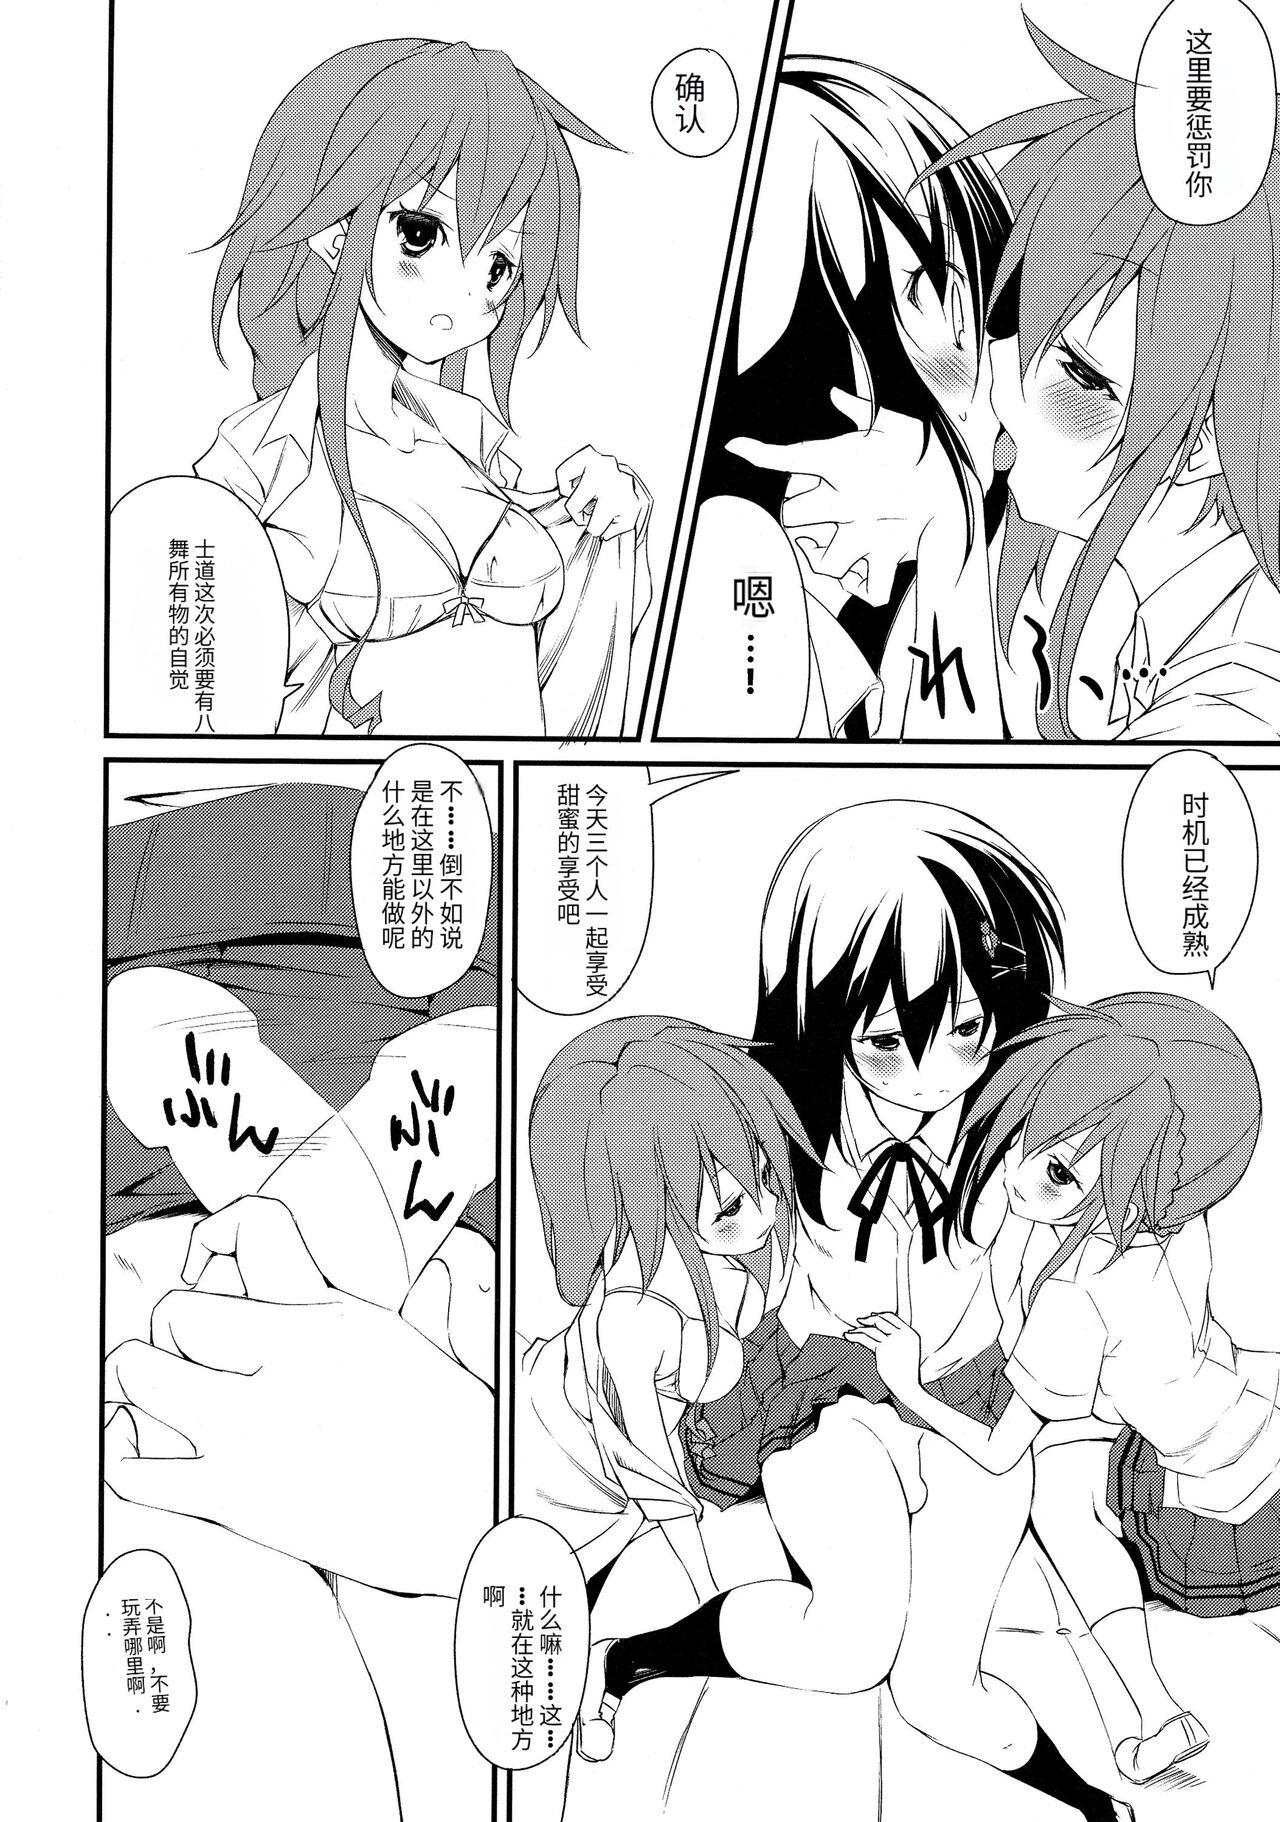 European Porn Shiori-chan, Yamaidon After School - Date a live Gay Kissing - Page 8